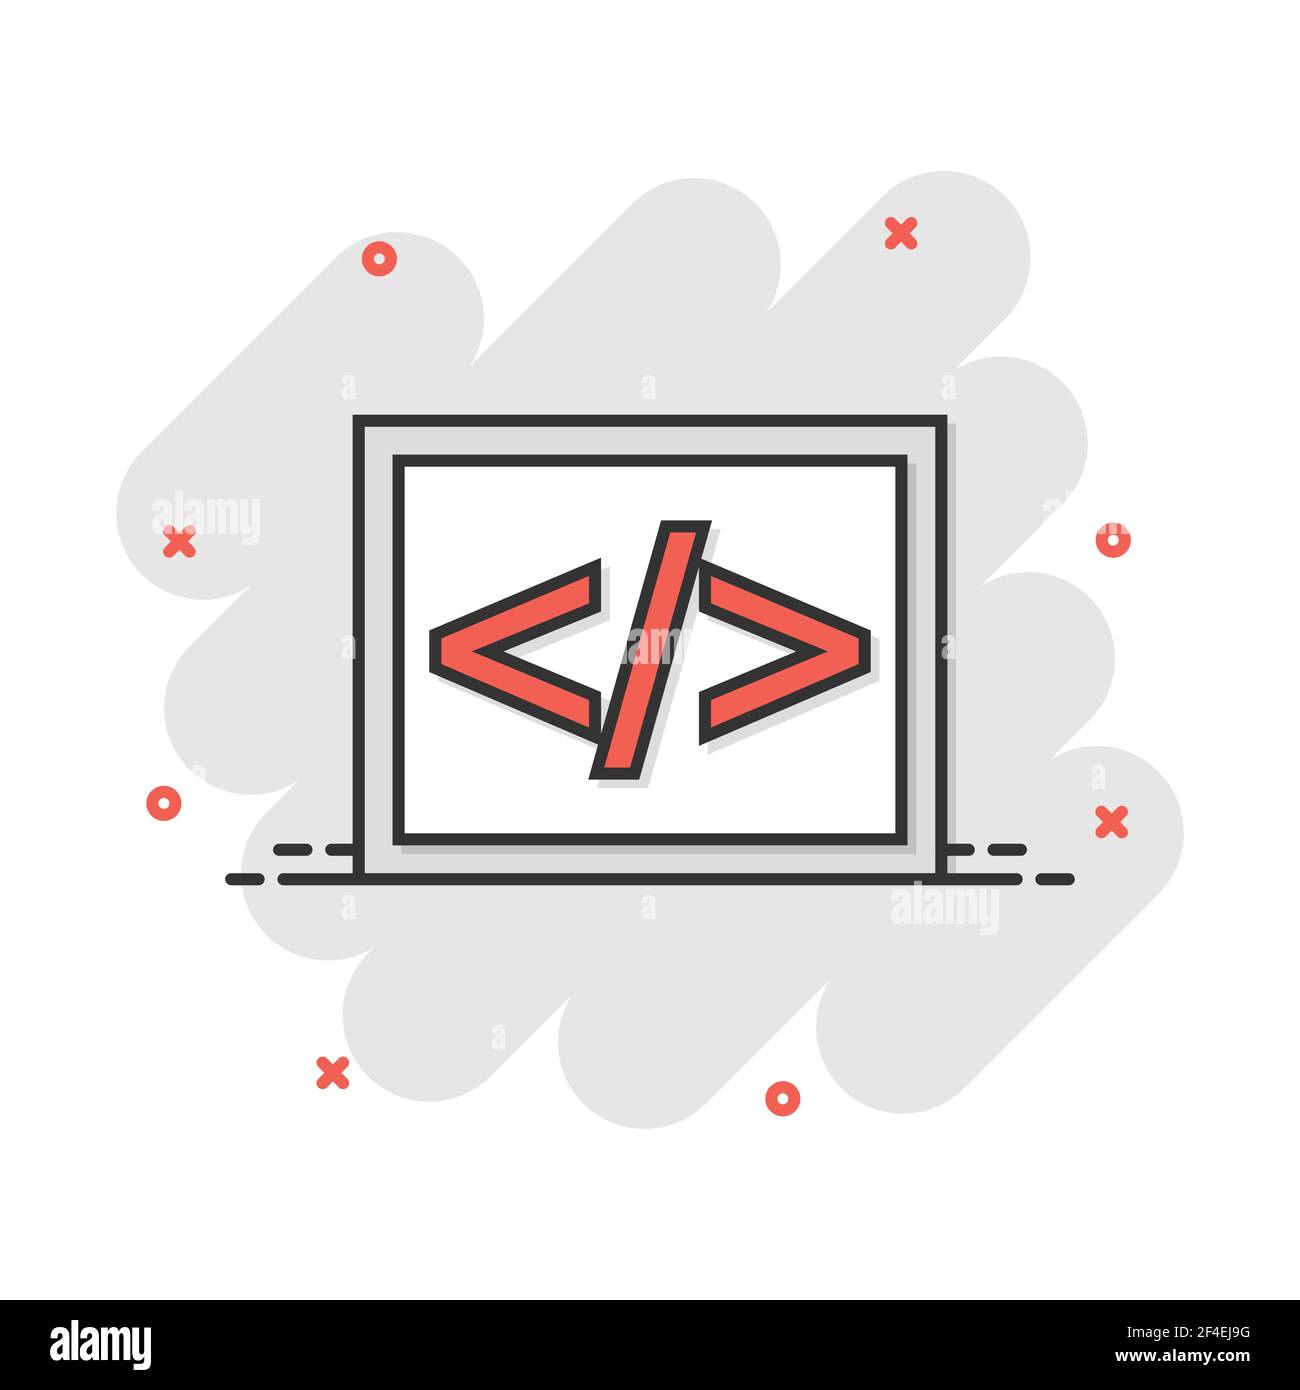 Vector cartoon open source icon in comic style. Api programming concept illustration pictogram. Programmer technology business splash effect concept. Stock Vector